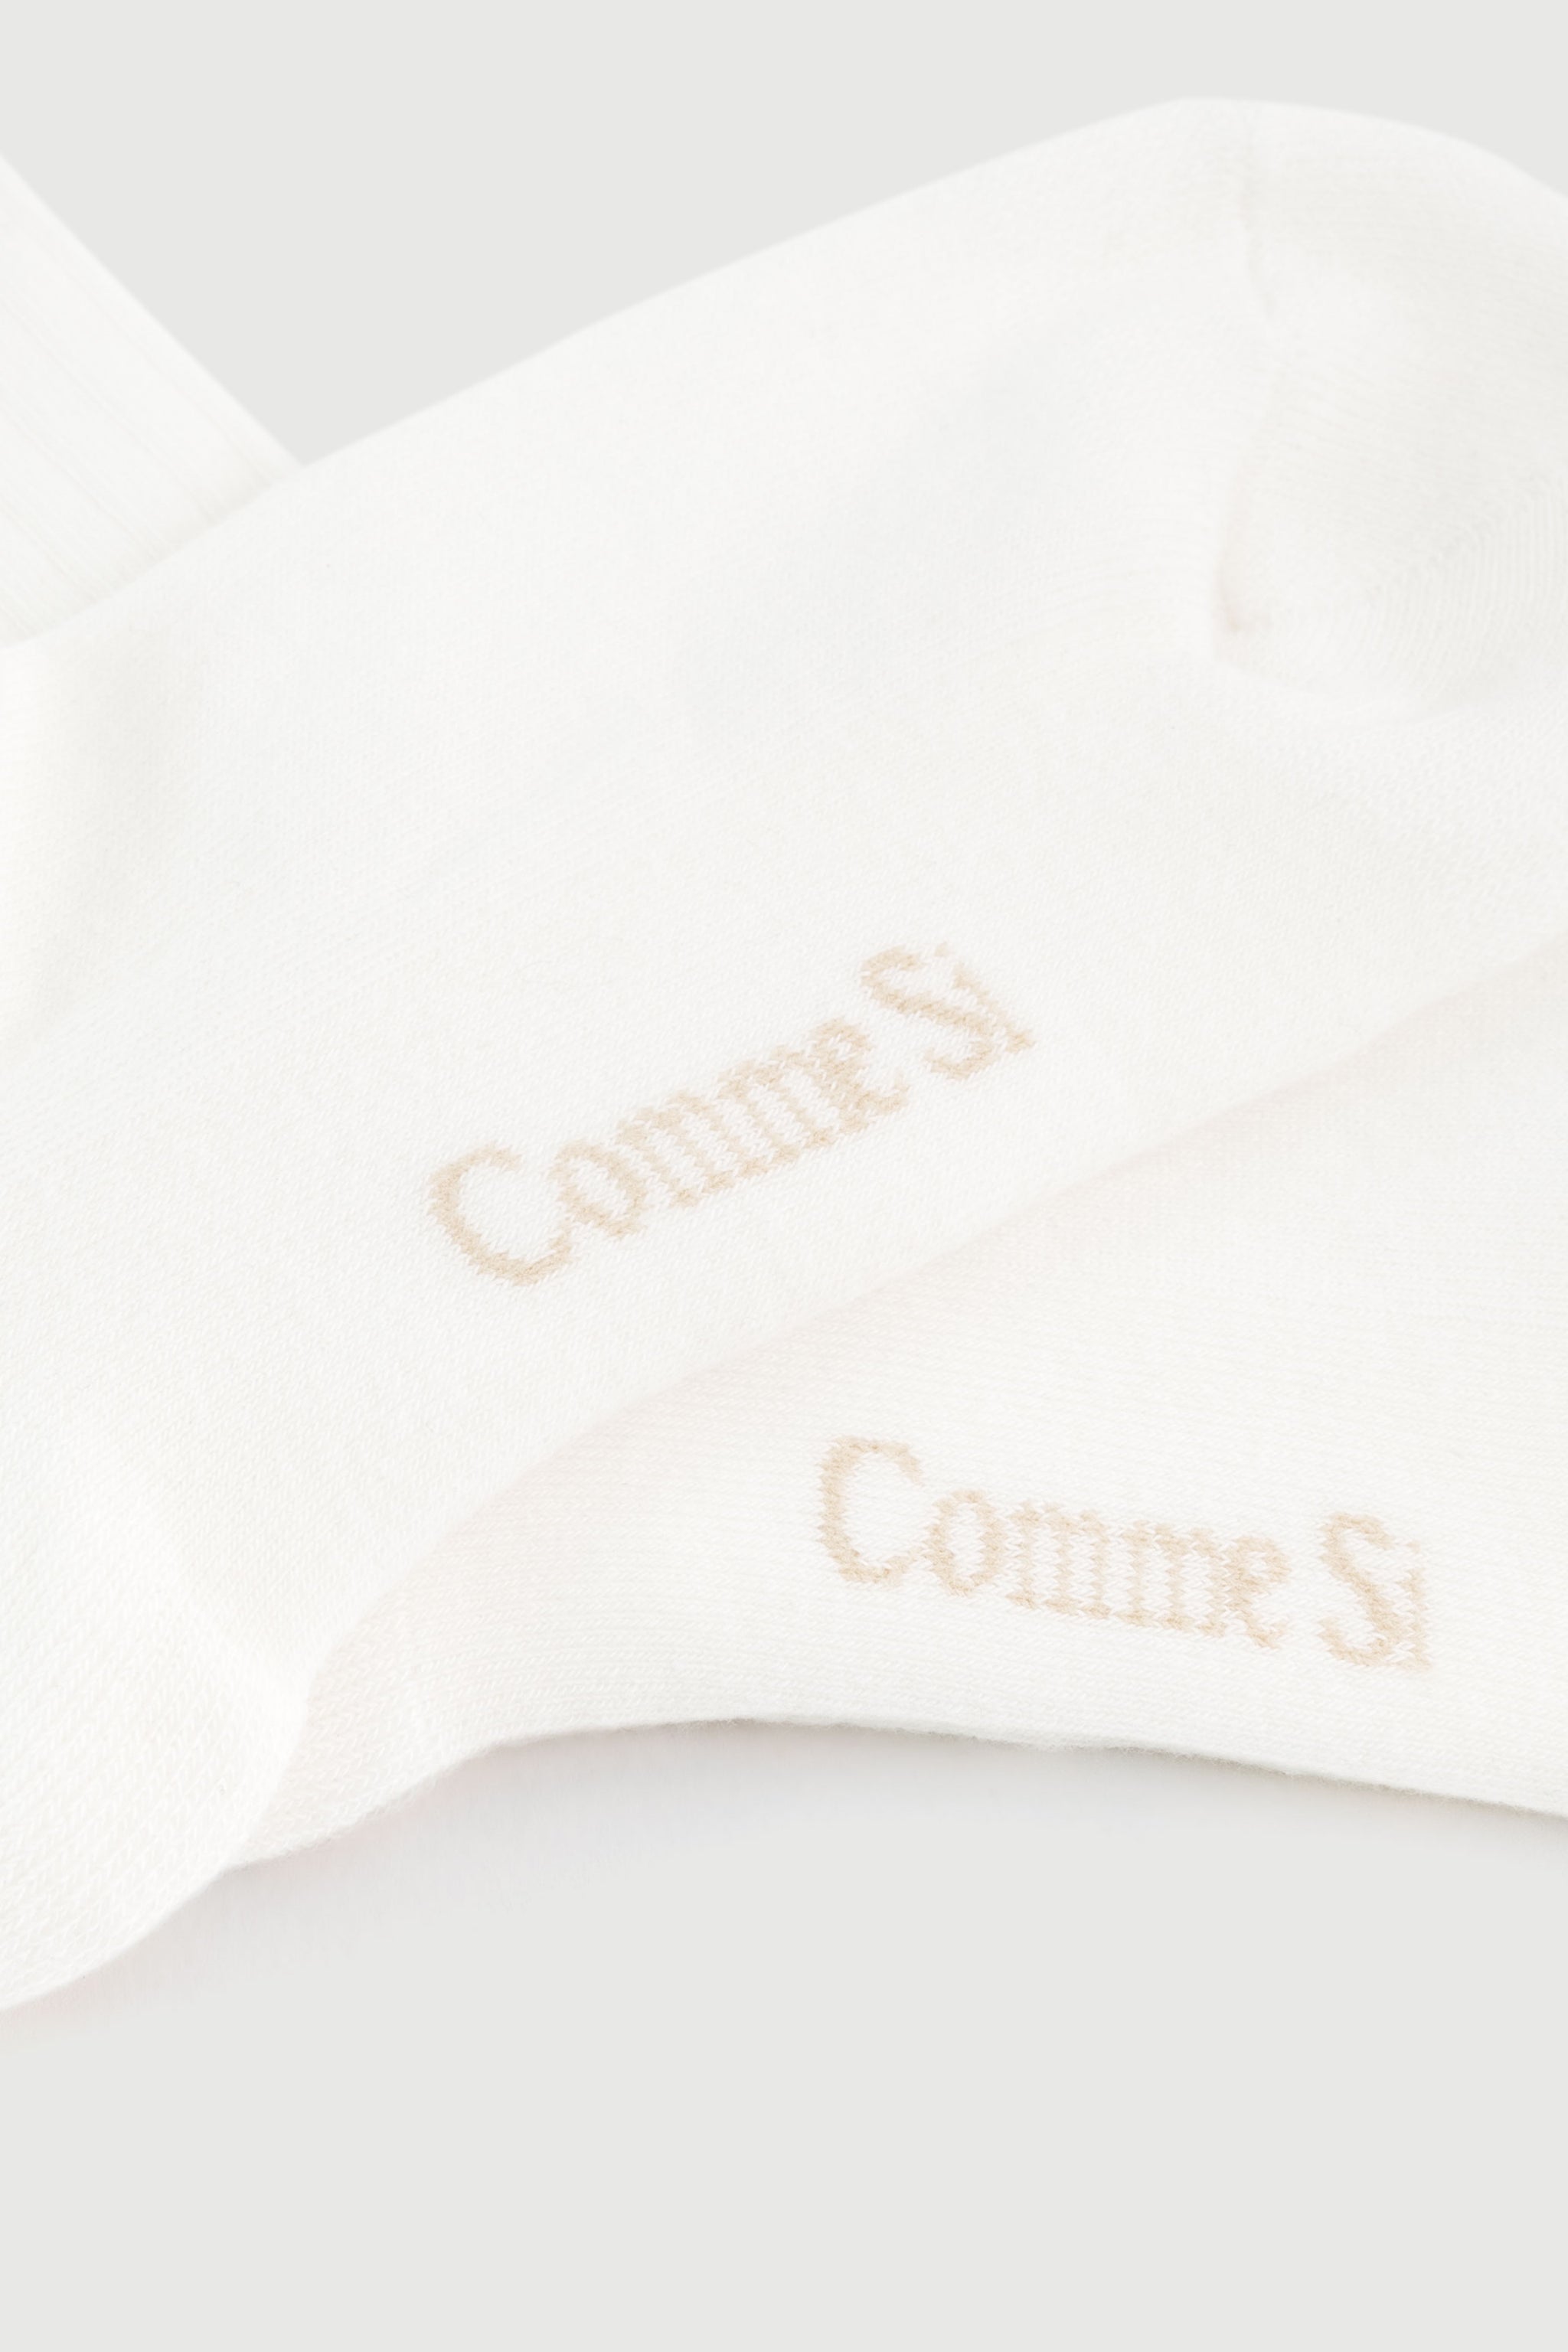 Footbed detail of The Everyday Sock in Off White, made with Organic Egyptian Cotton, by Comme Si